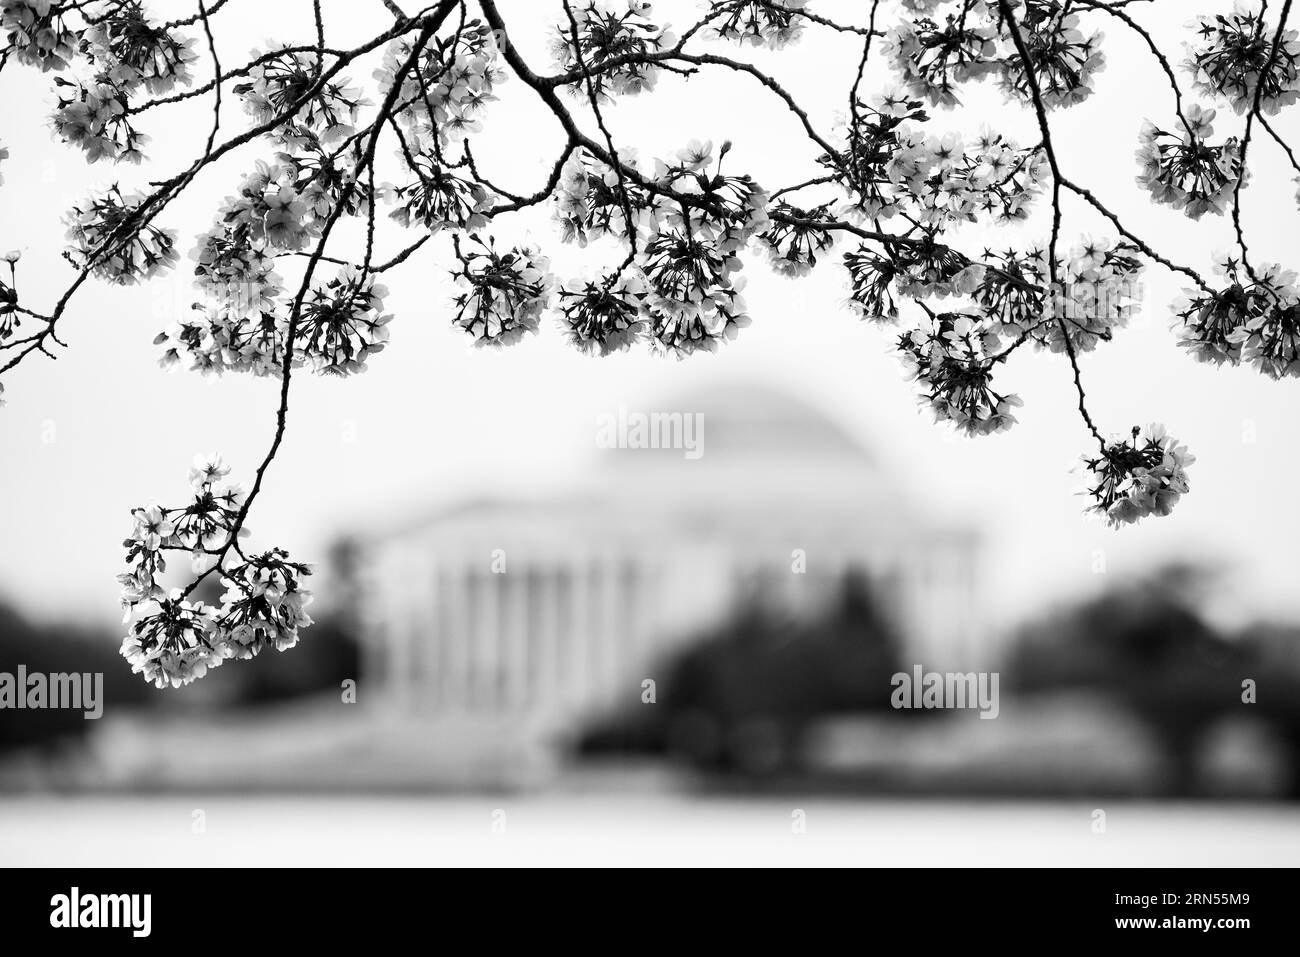 WASHINGTON DC, United States — The Jefferson Memorial stands framed by vibrant cherry blossoms, marking the onset of spring in the capital. These blossoms, a gift from Japan in 1912, provide a picturesque setting to the memorial dedicated to the third U.S. president, Thomas Jefferson, highlighting the melding of natural beauty and American history. Stock Photo